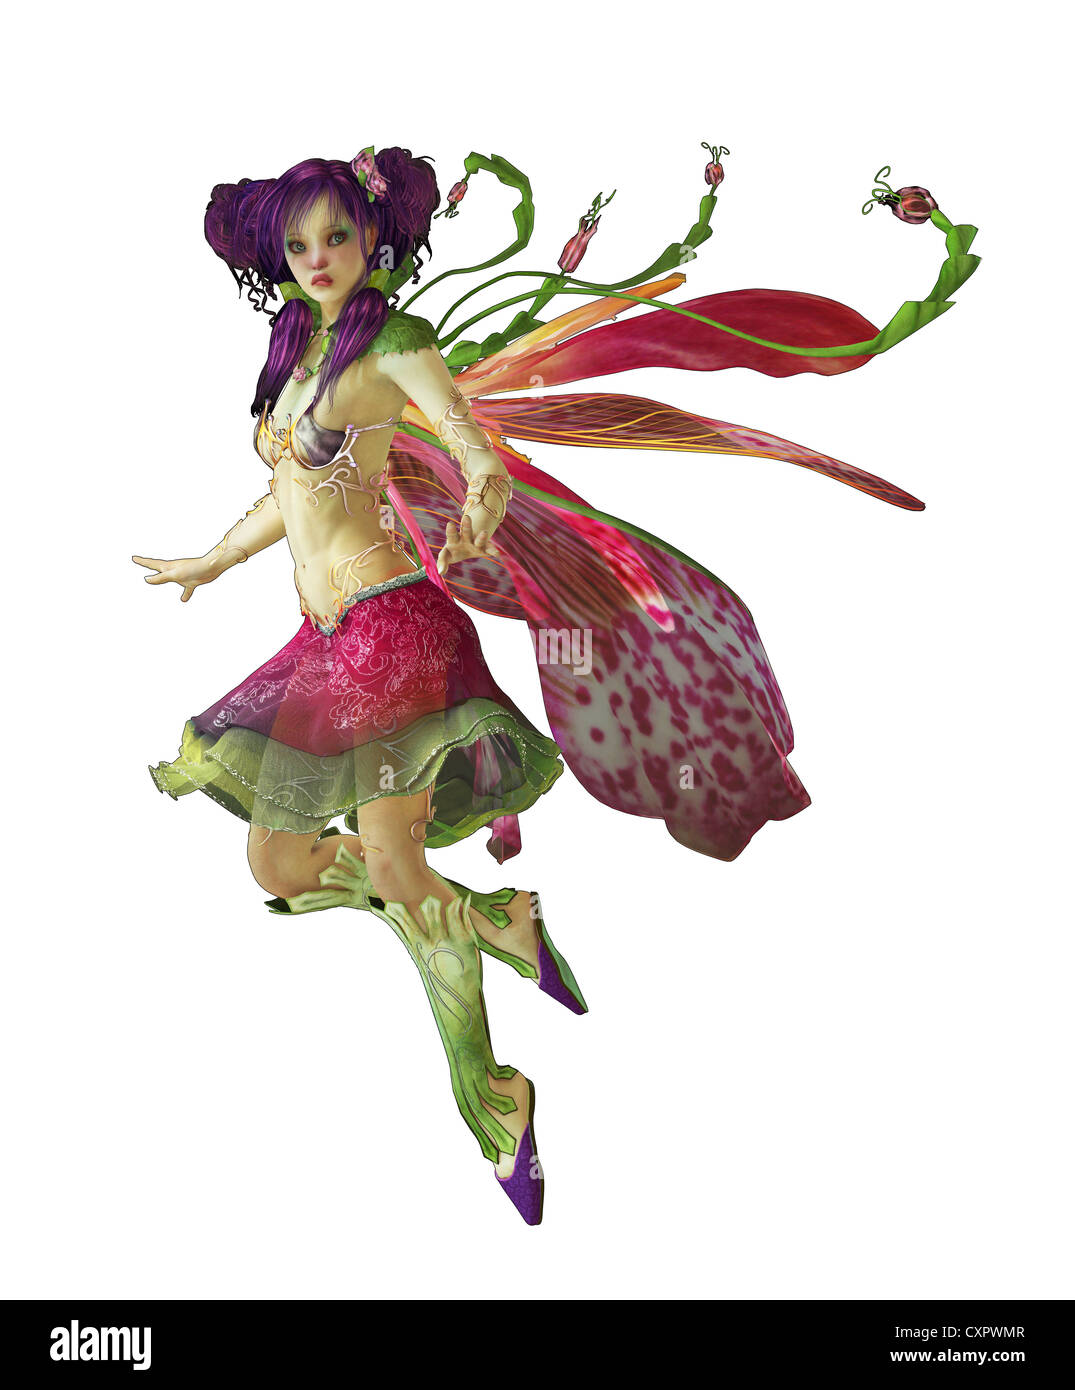 a graceful fairy with wings and a cute hairstyle Stock Photo